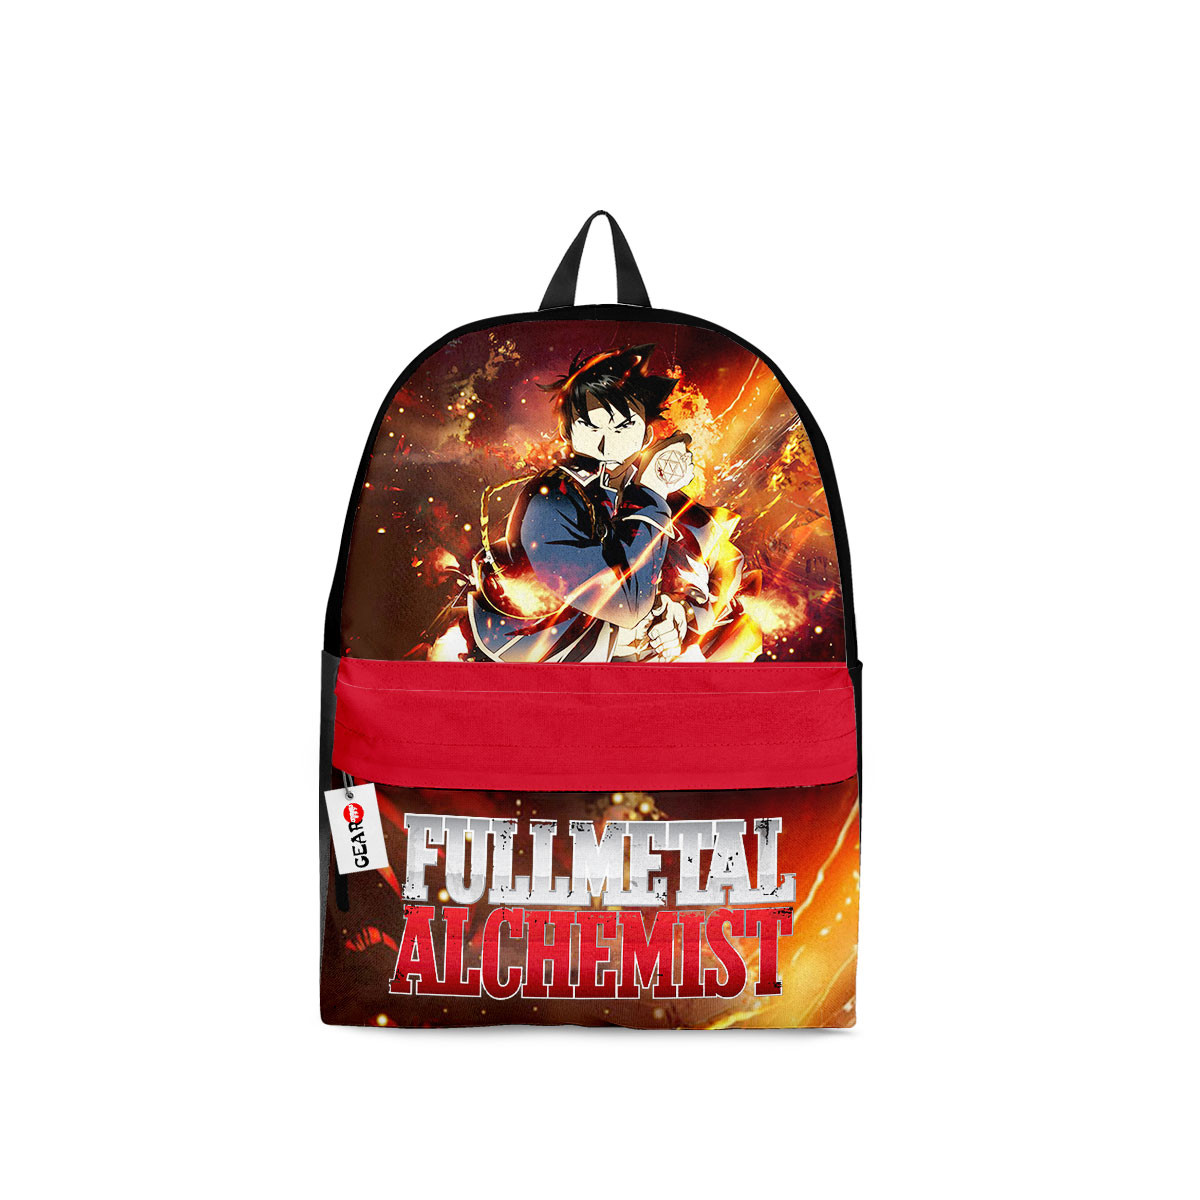 Latest Anime style products 152